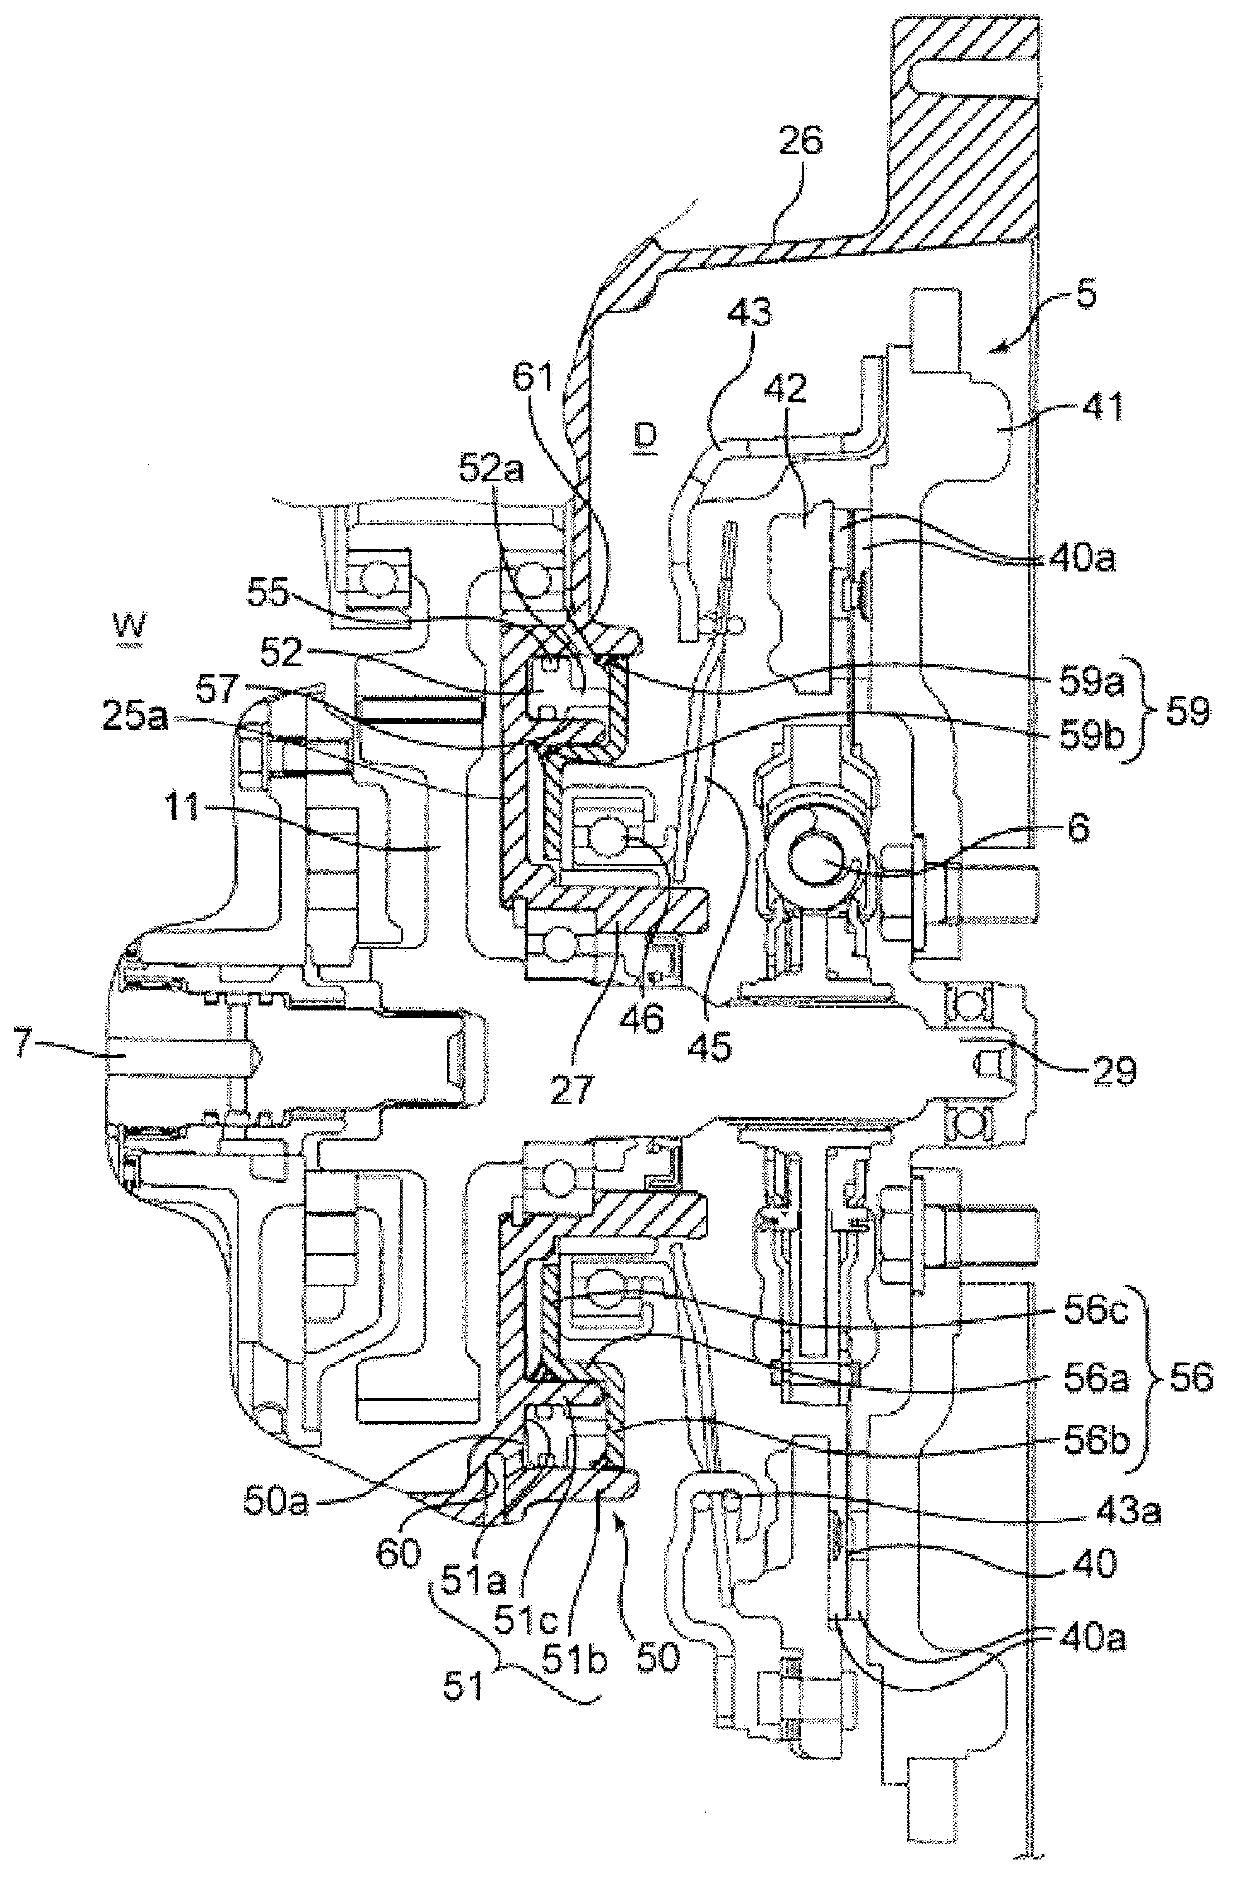 Power transmission device for vehicle